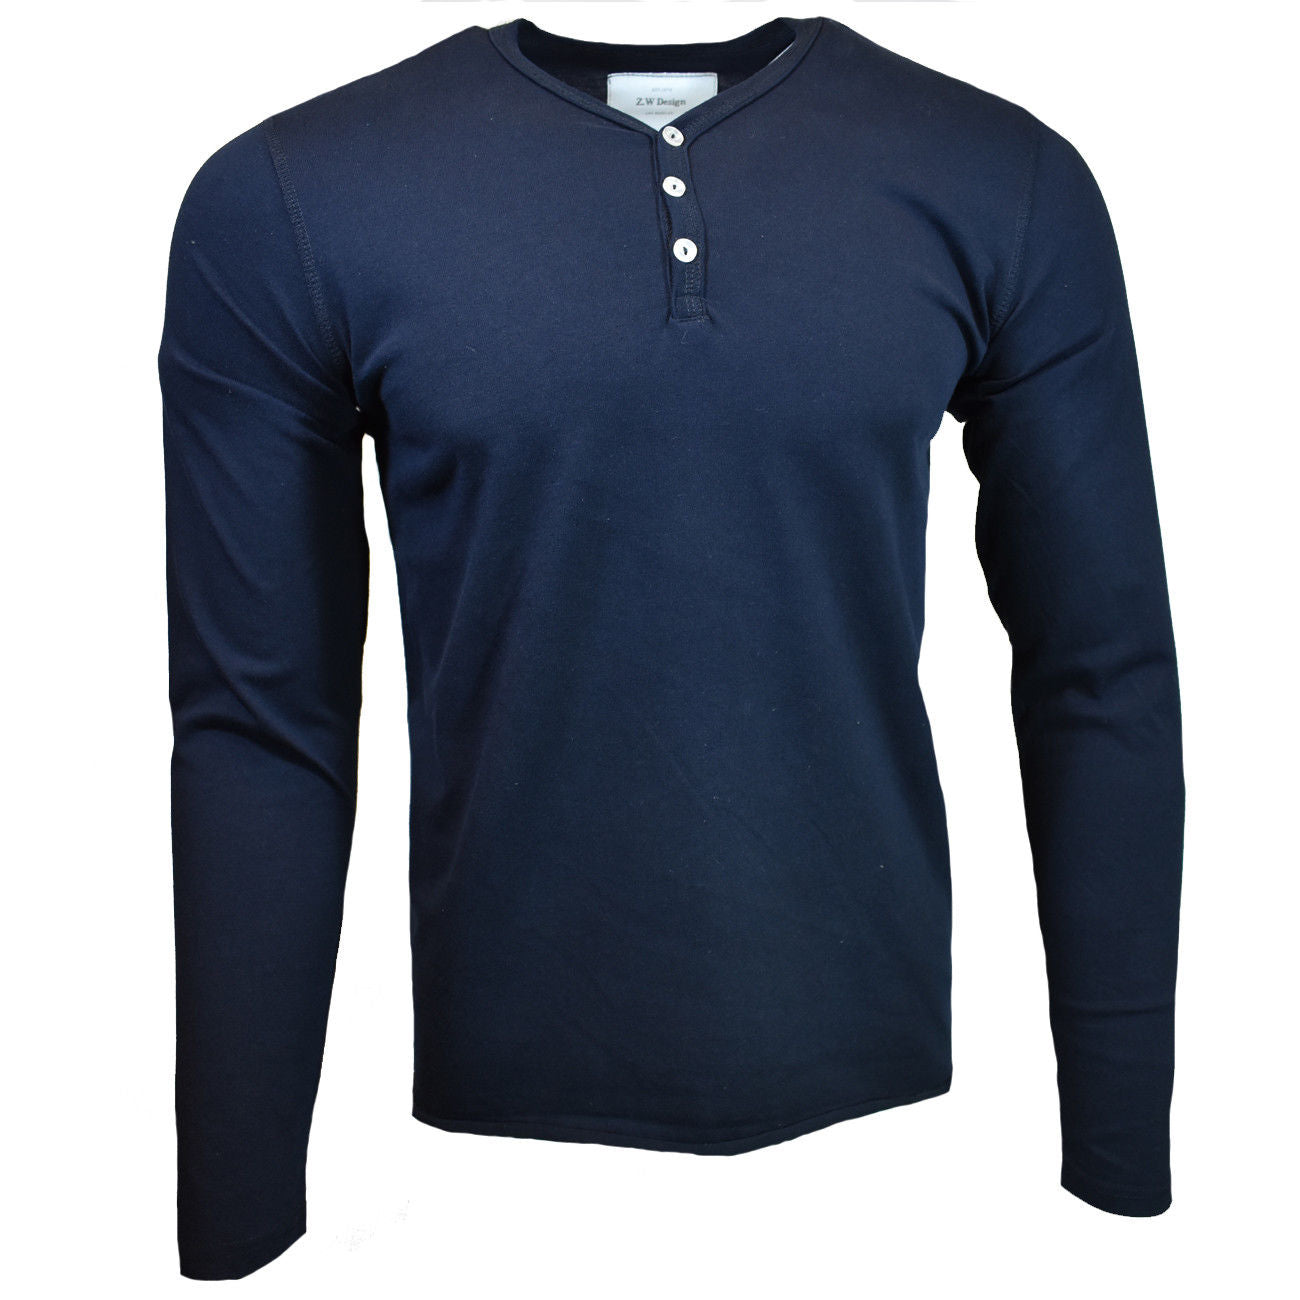 Henley Shirt Mens Long Sleeve Button Thermal Slim Fit Pullover NAVY BLUE